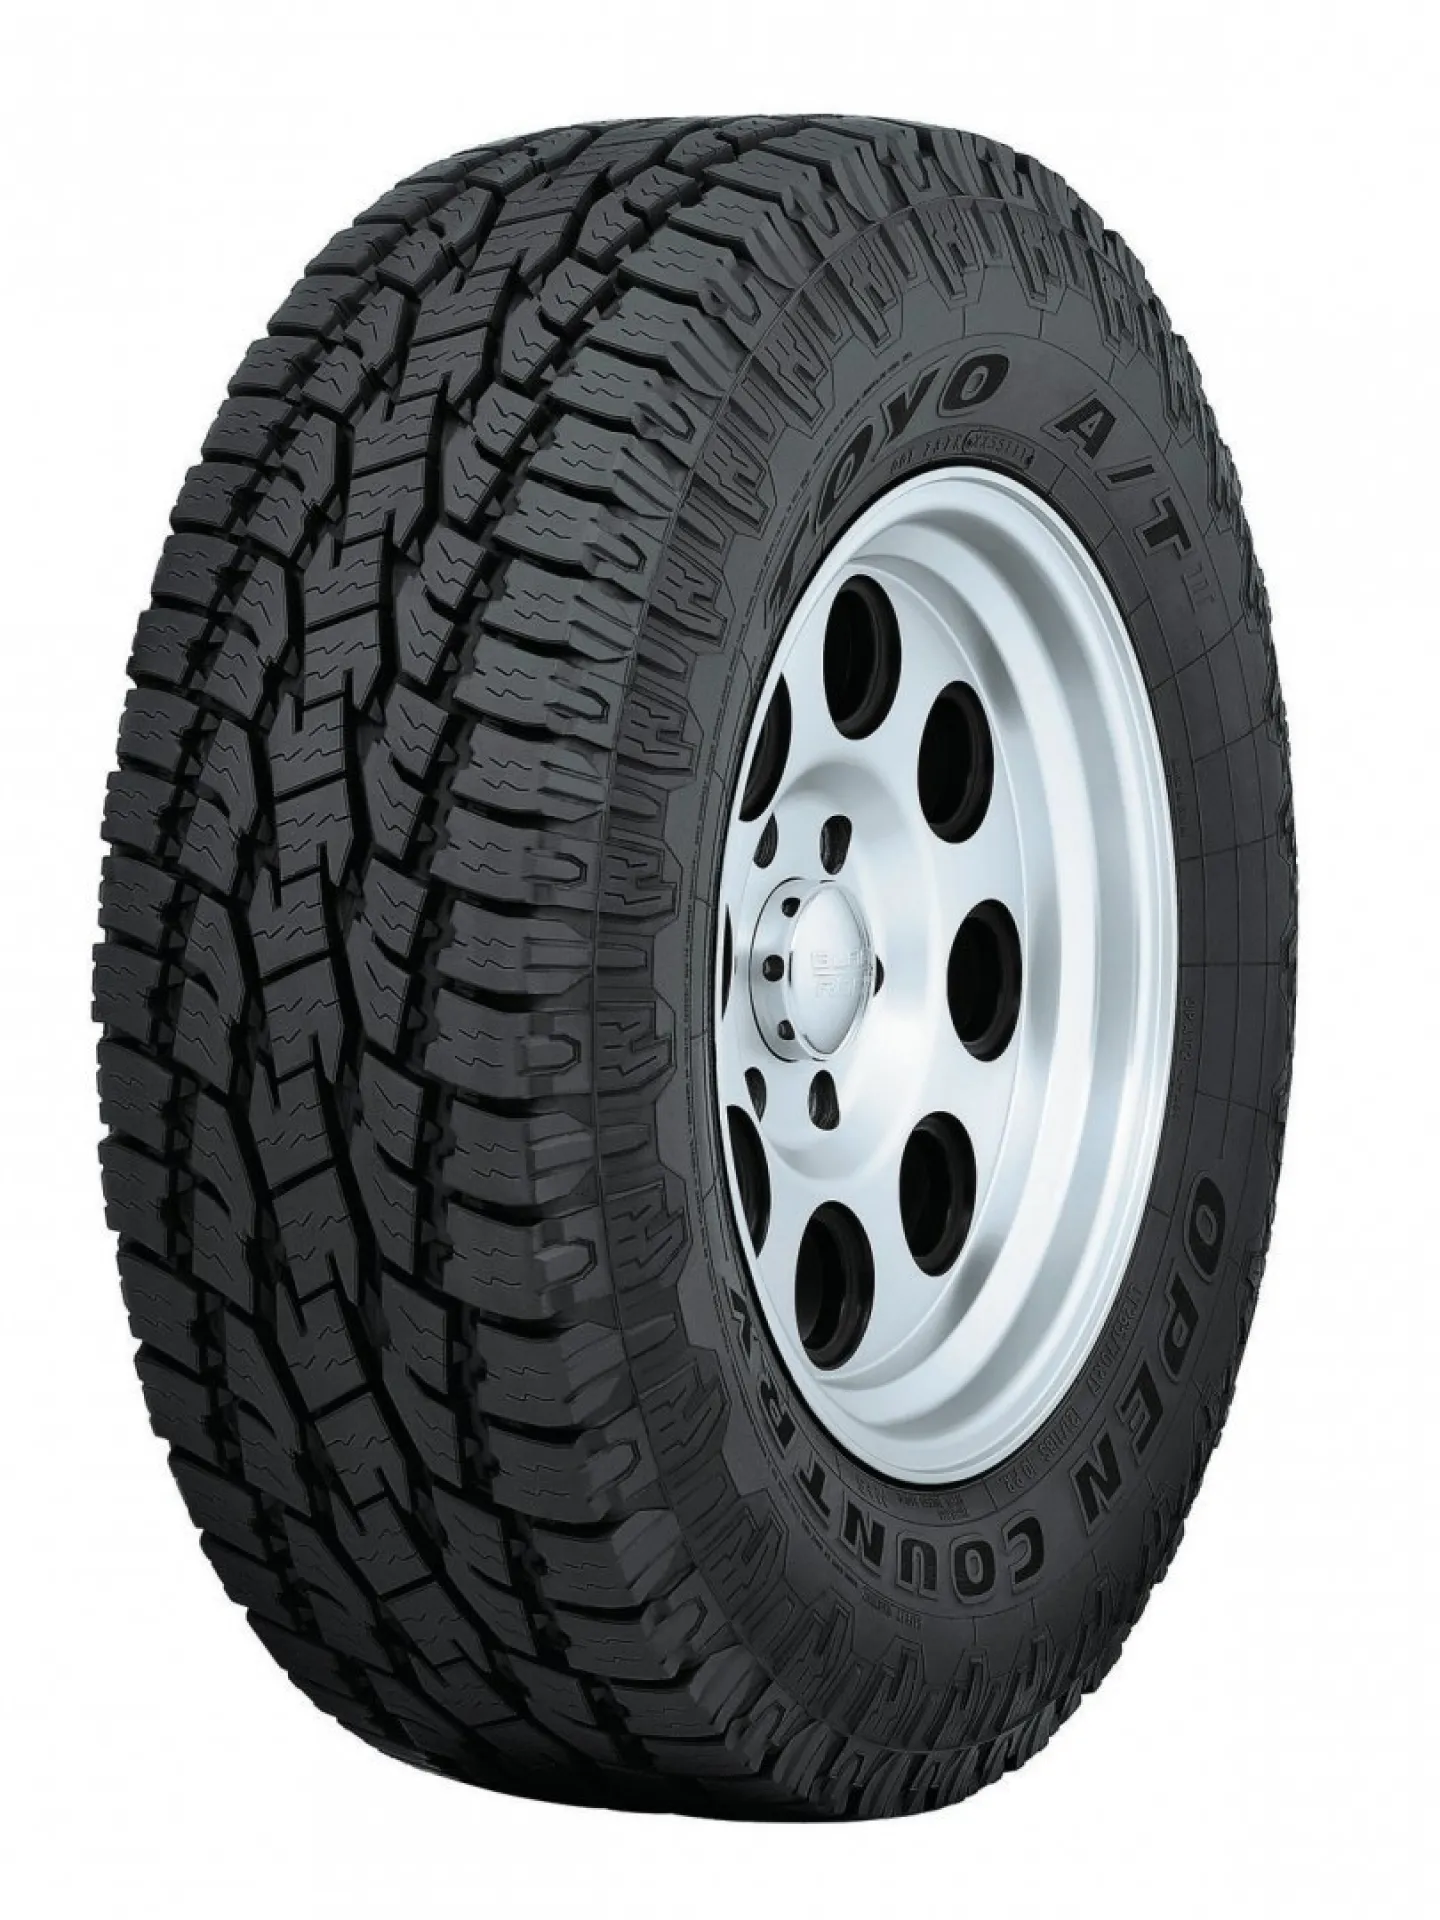 Toyo Open Country A/T plus 205/80R16 110T